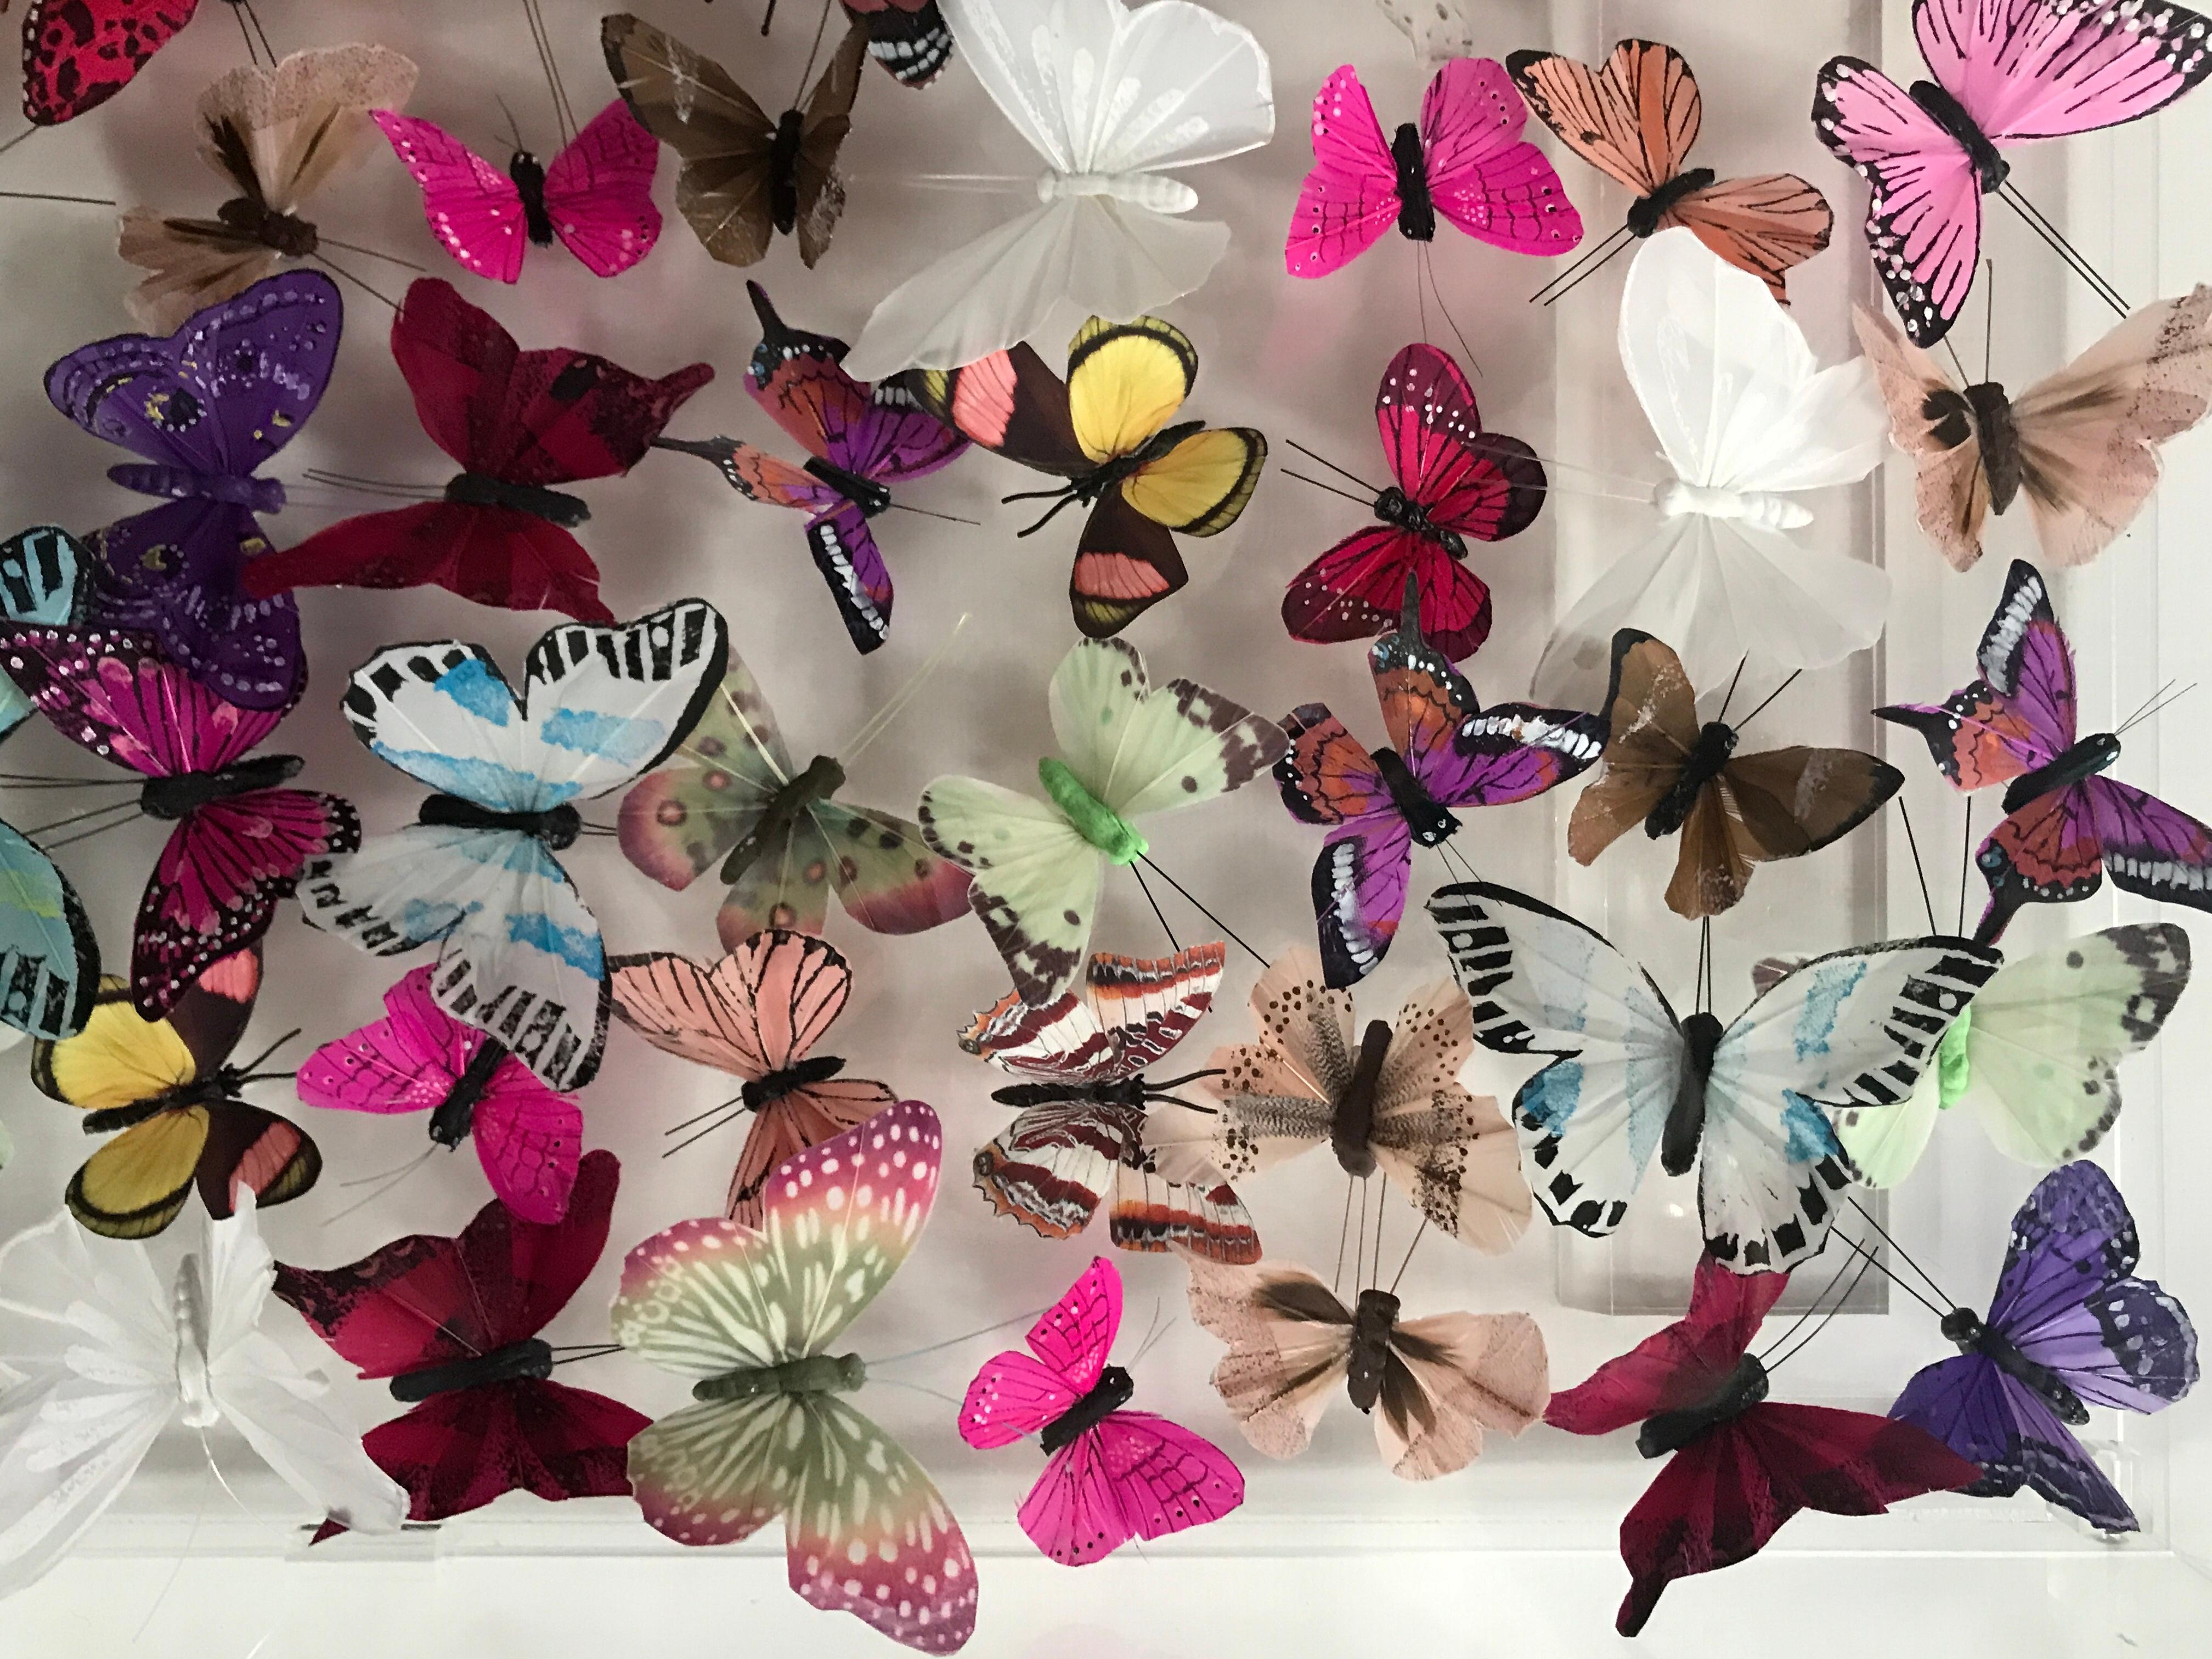 Melange II is an original work by Michael Olsen. The bright and bold colours of the butterflies make this a joyful piece. Olsen’s use of perspex allows for work to fit sleekly into any interior.

Michael Olsen says: My working life has lead me down